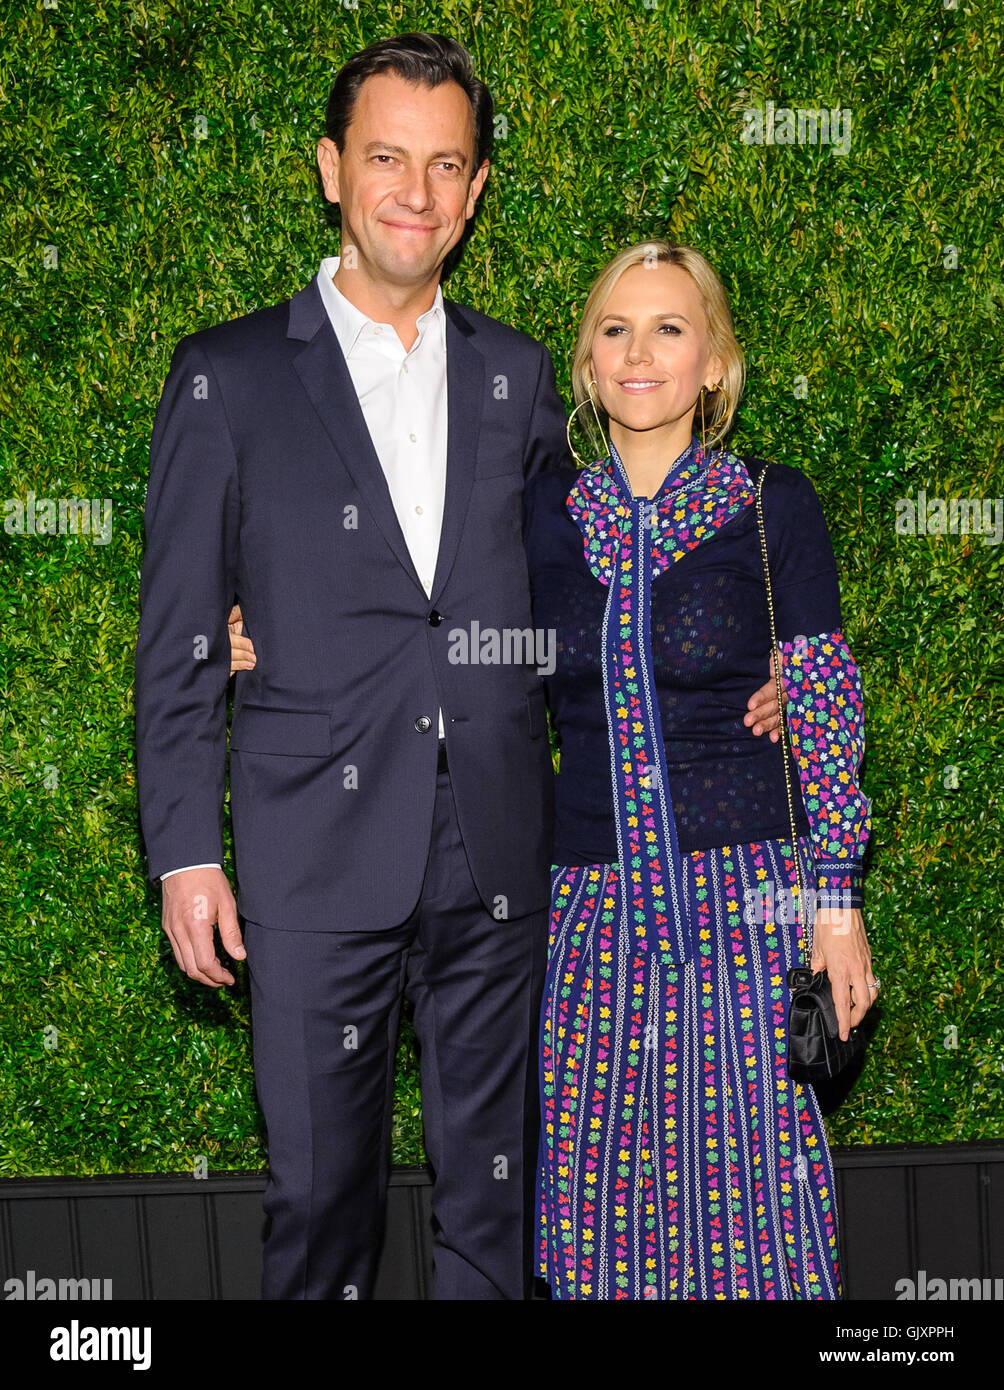 NEW YORK, NY - September 07, 2018: Designer Tory Burch and boyfriend Pierre-Yves  Roussel pose before the Tory Burch Spring Summer 2019 fashion show du Stock  Photo - Alamy